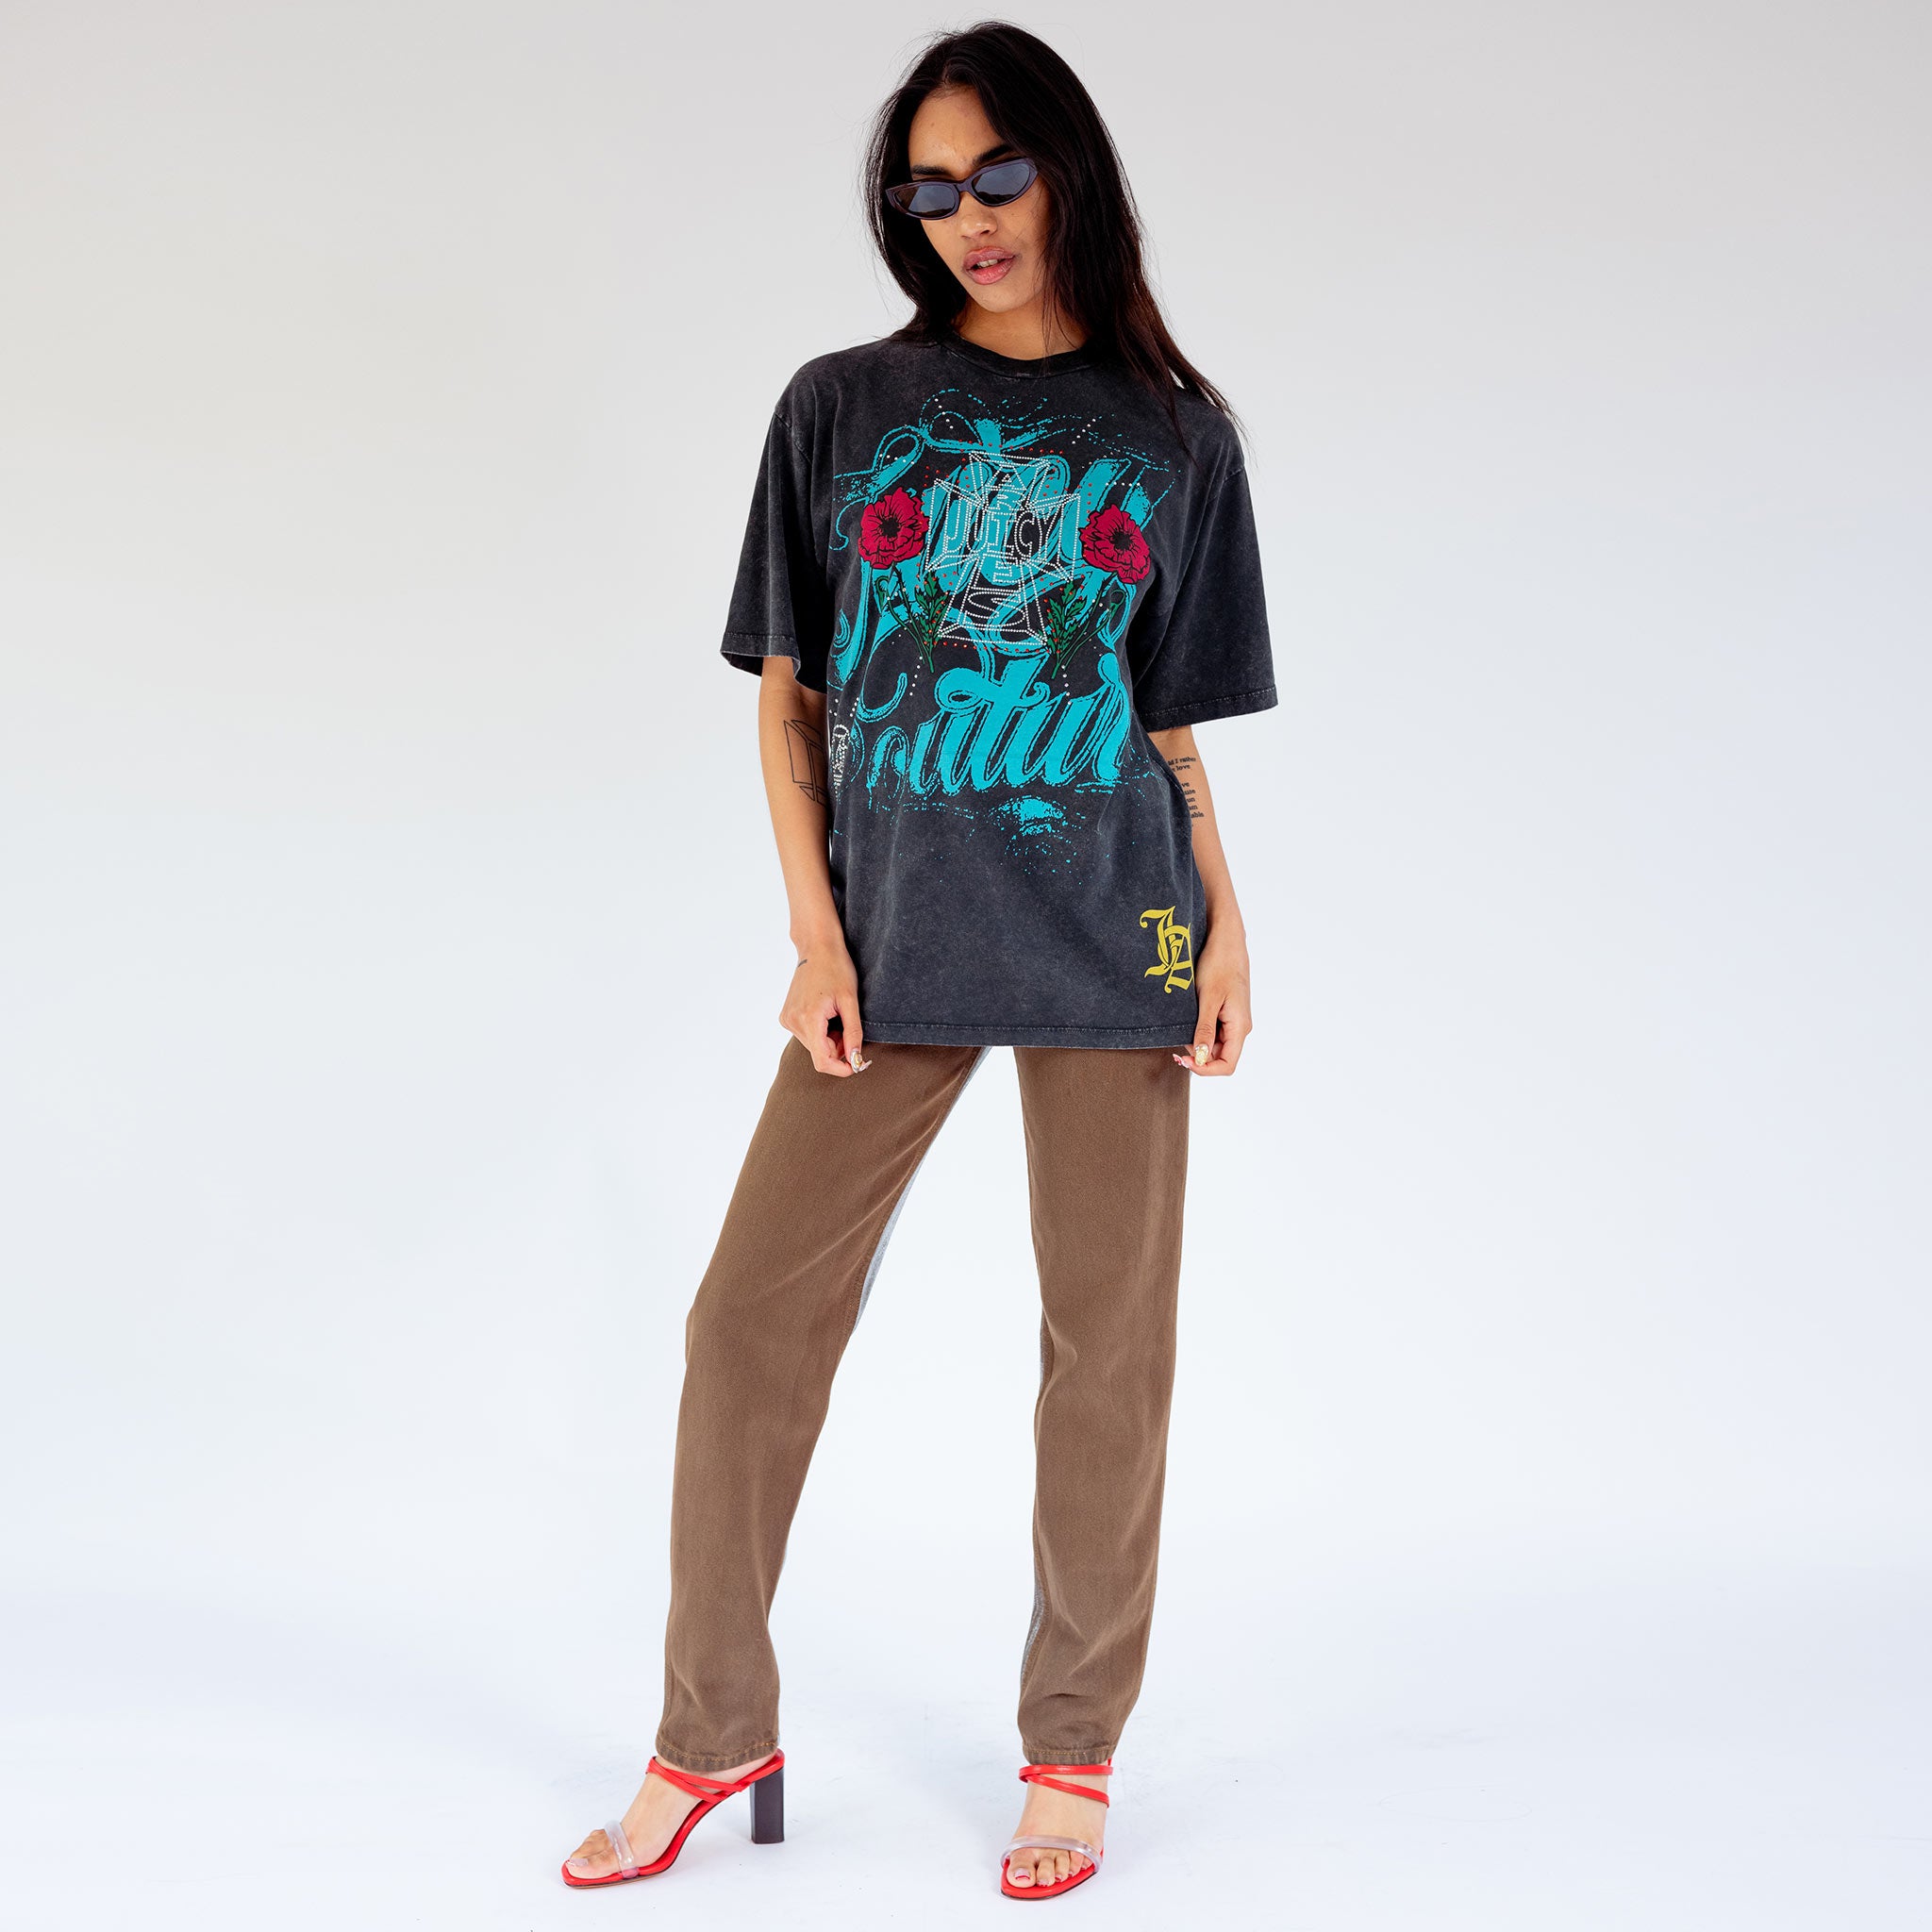 Full outfit view of a model wearing the faded black Juicy Loaded graphic tee with blue graphic lettering and rhinestone embellishments.